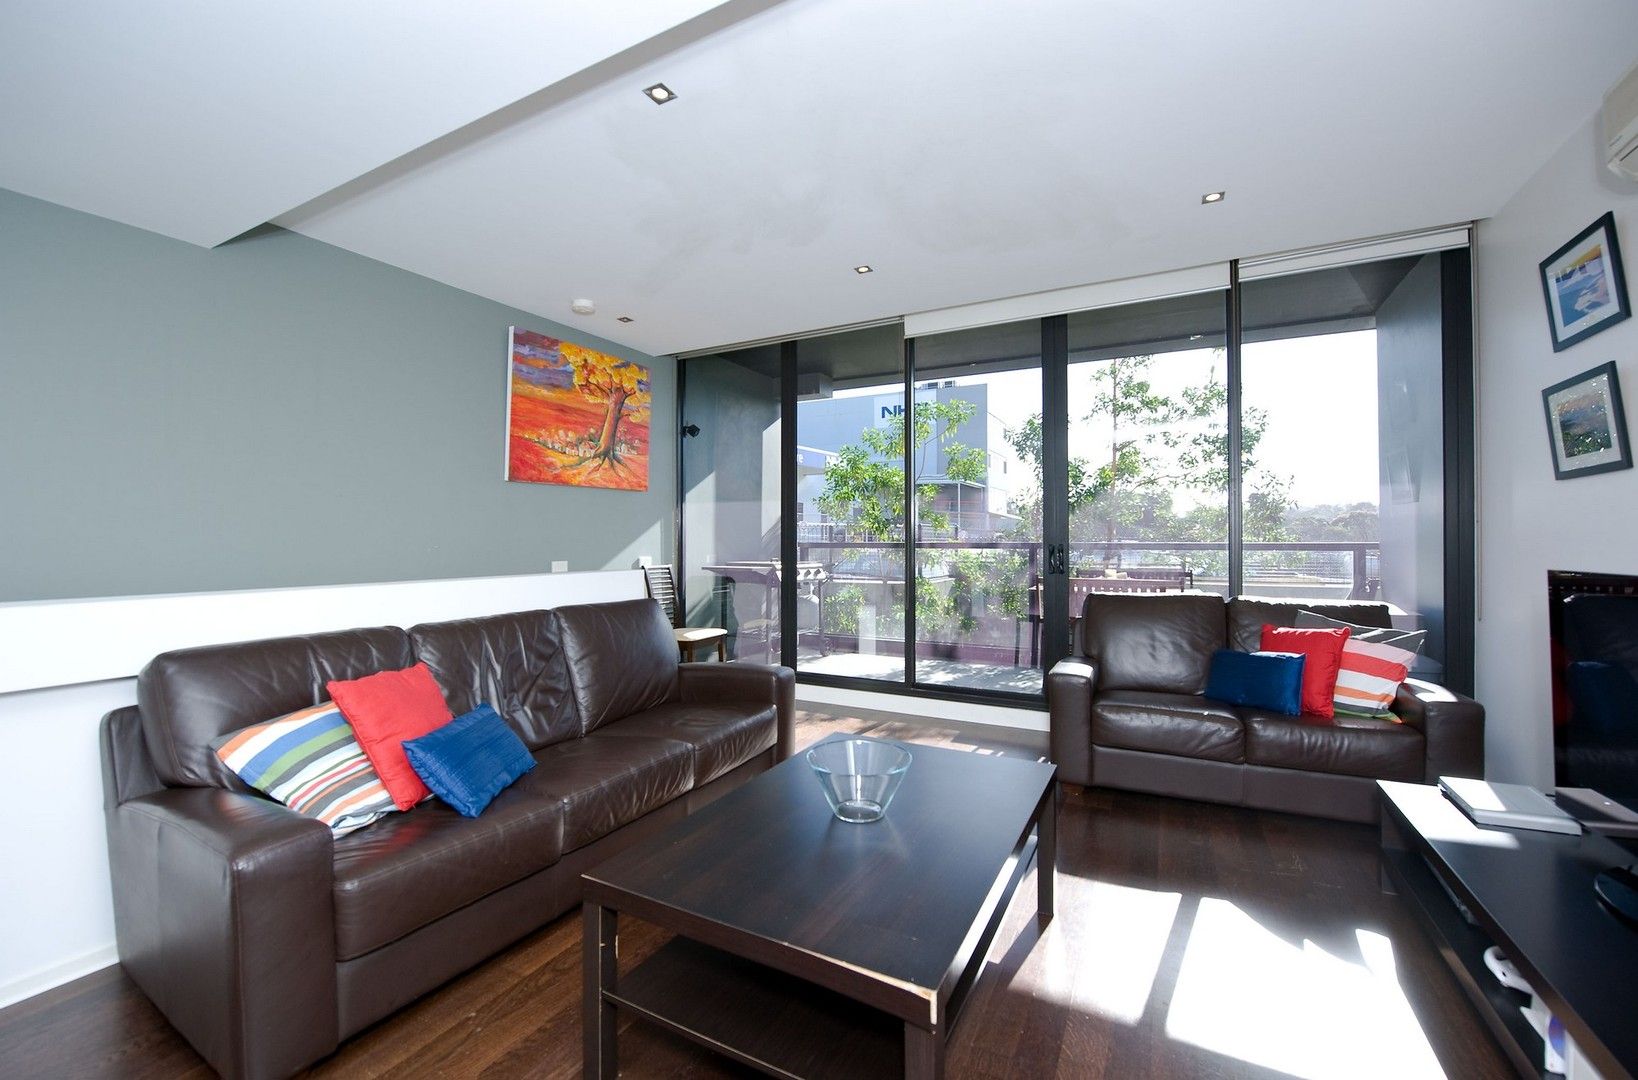 2 bedrooms Apartment / Unit / Flat in 5/69 River Street RICHMOND VIC, 3121